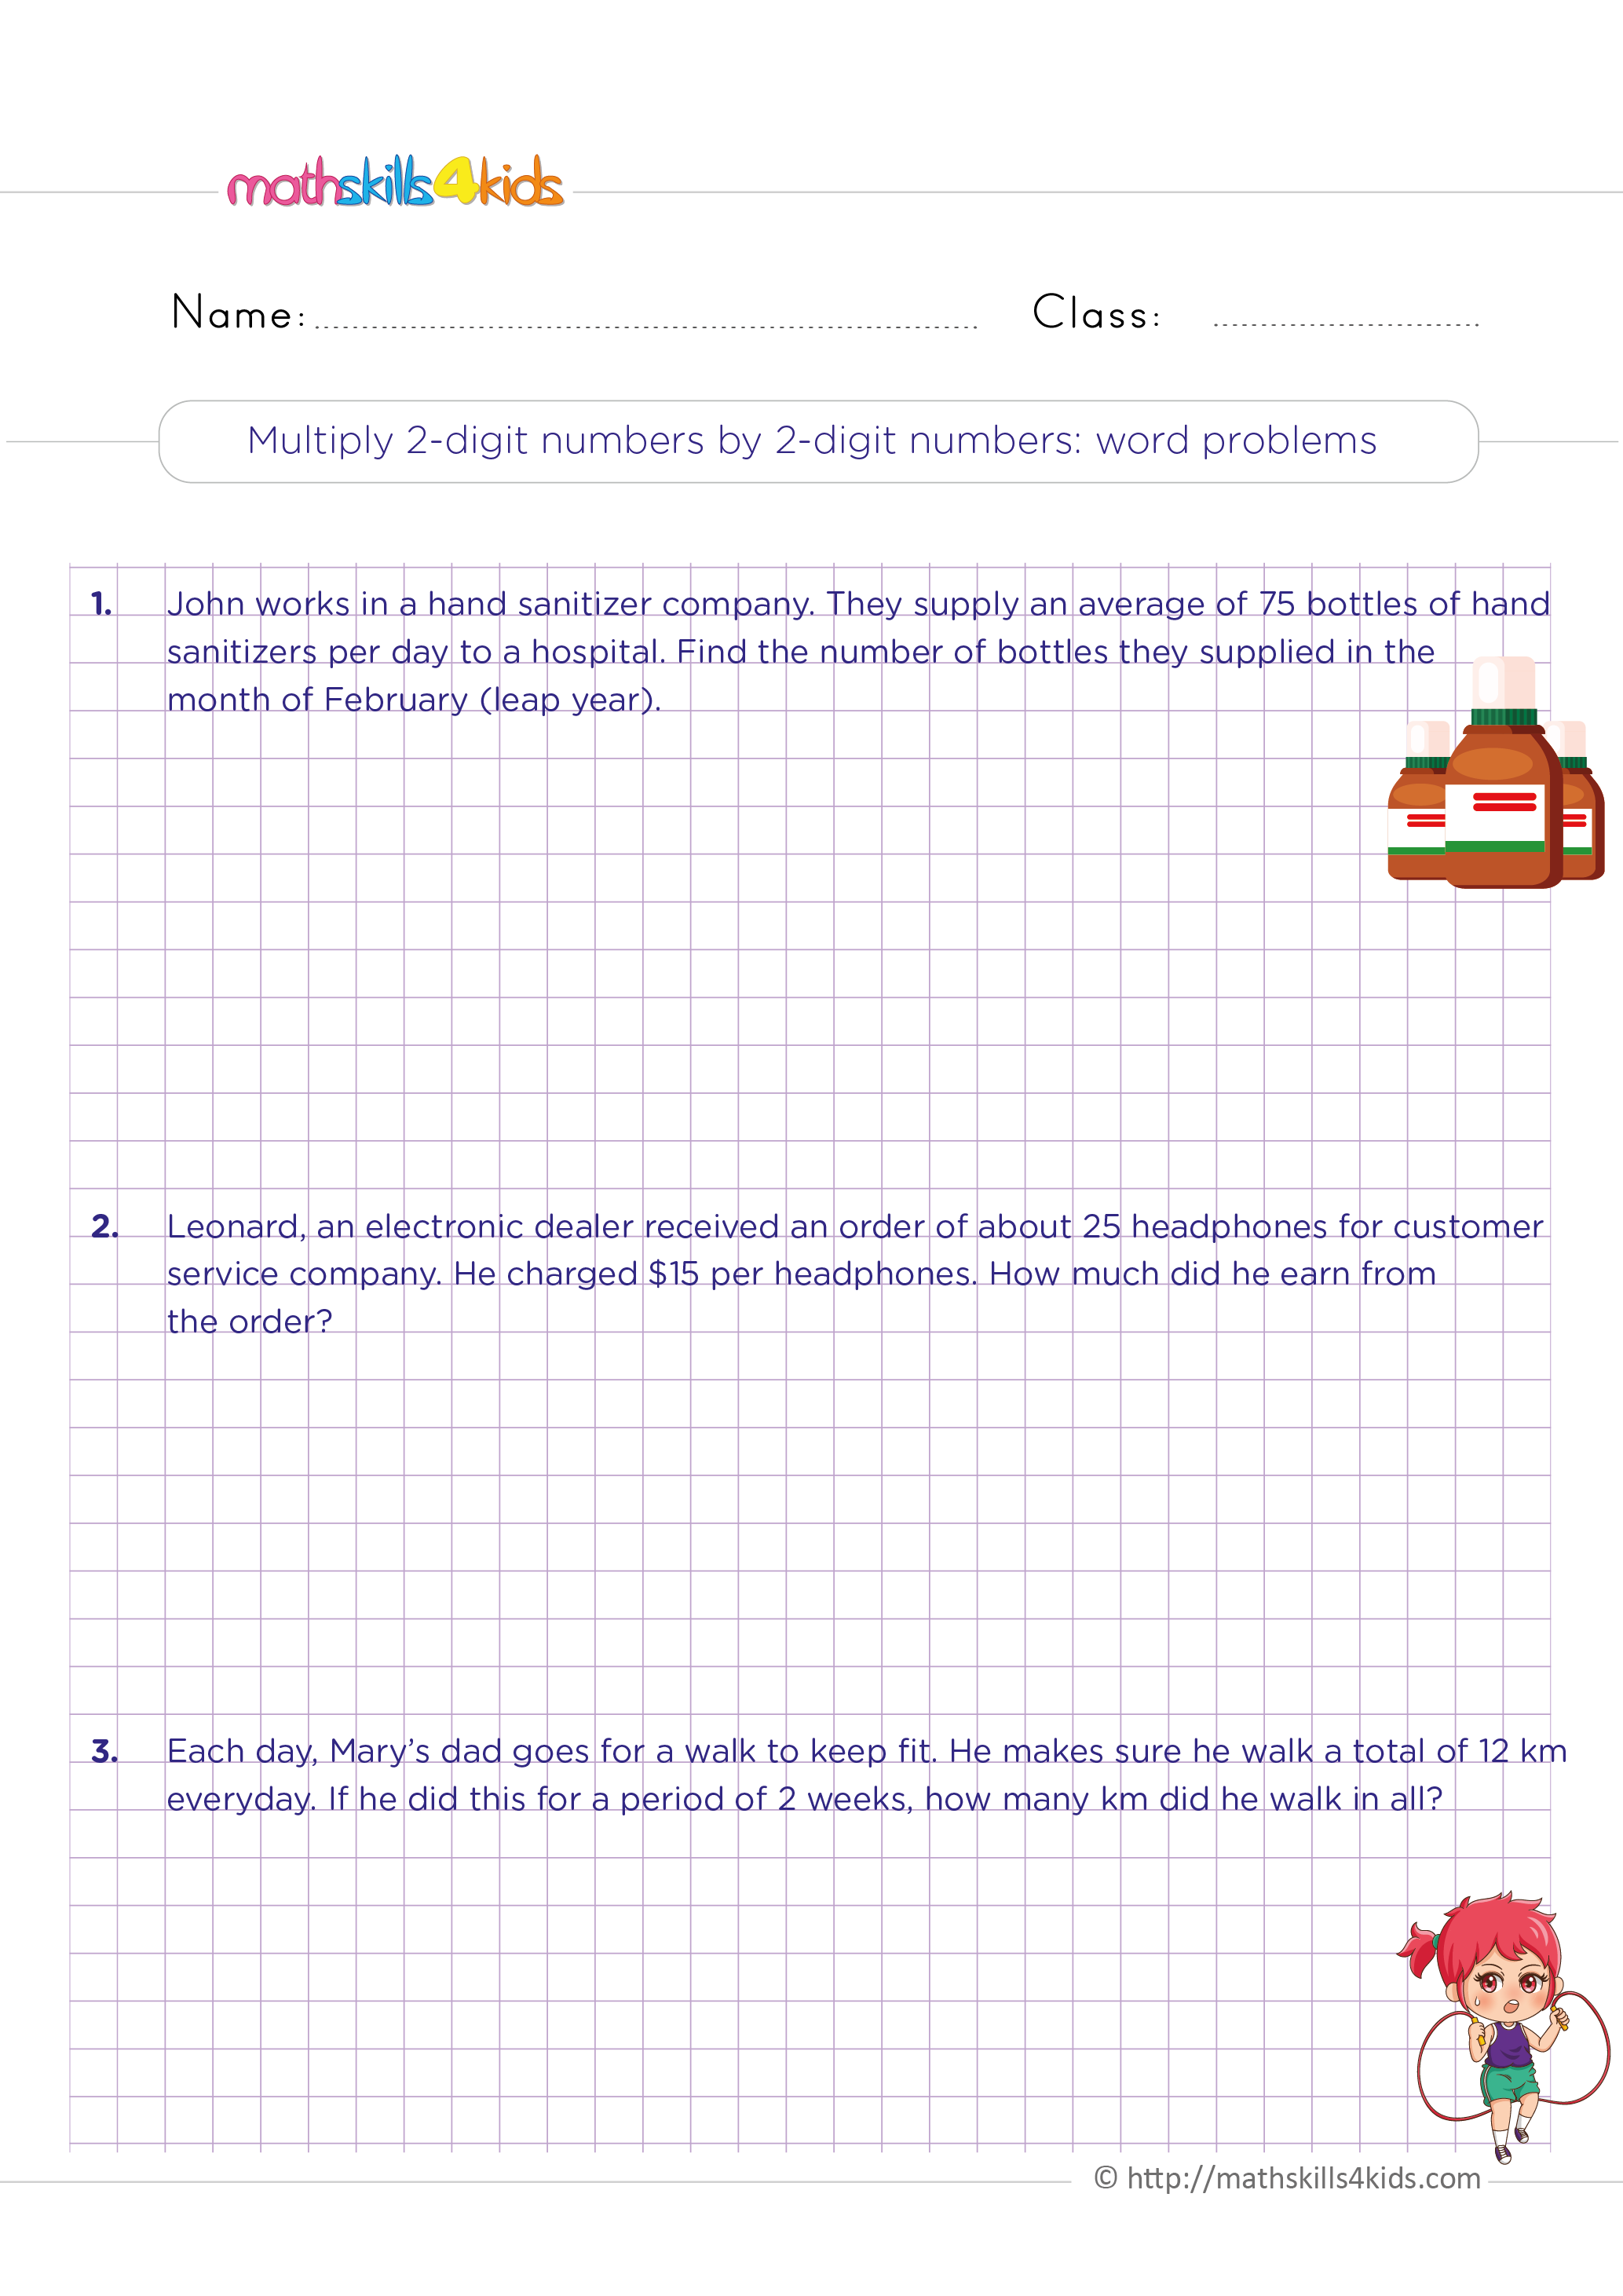 4th Grade multiplication worksheets with answers - Multiply a 2-digit number by a 2-digit number word problems